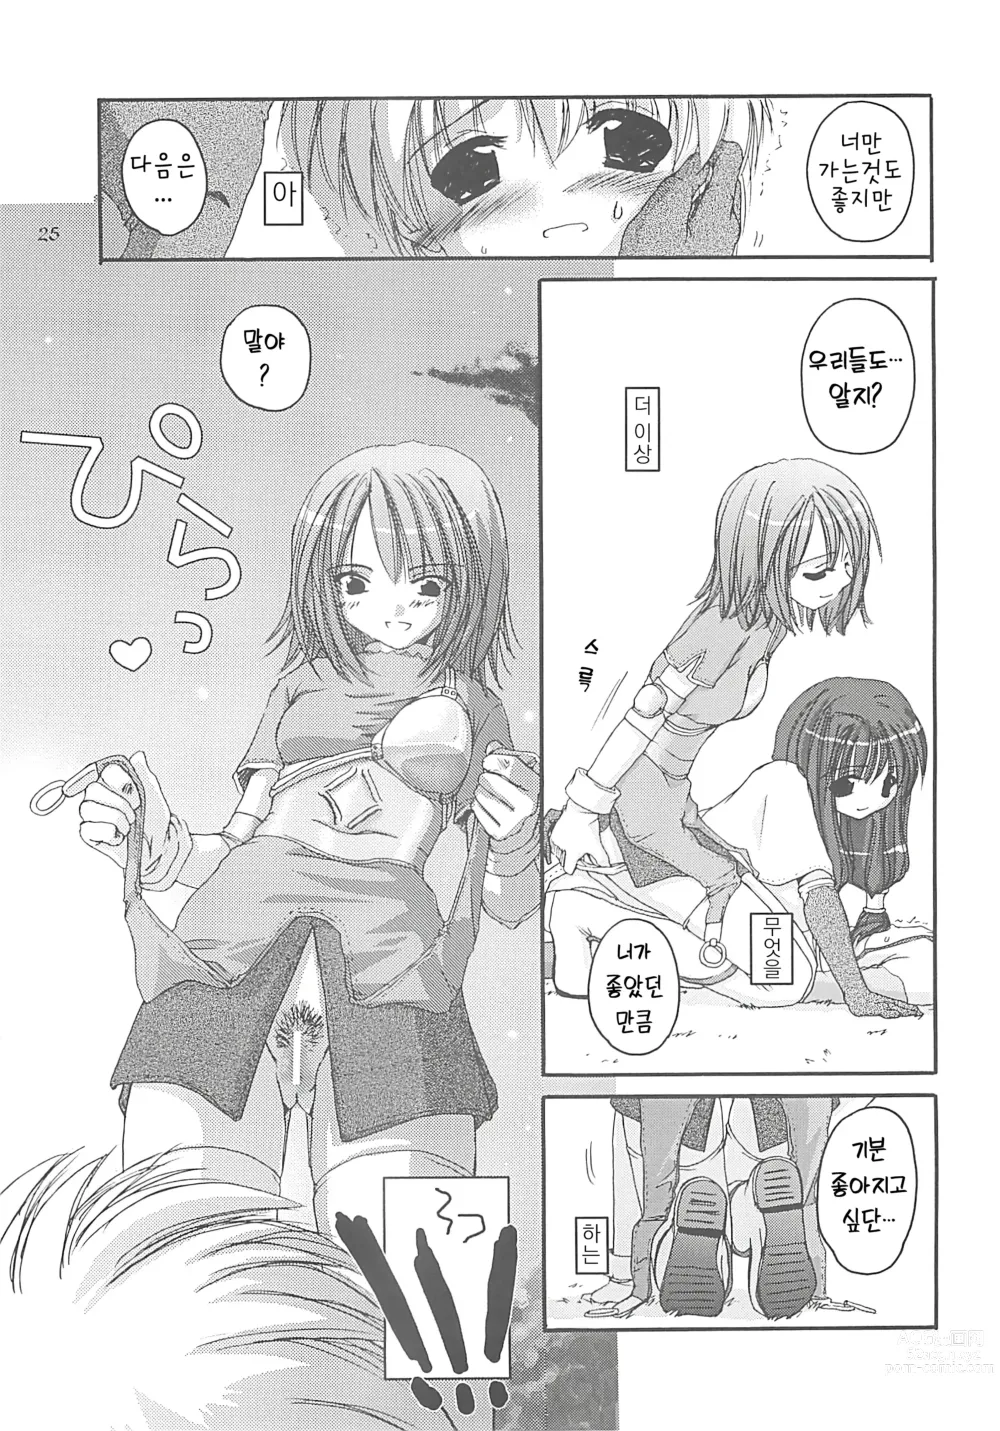 Page 24 of doujinshi D.L. Action 13